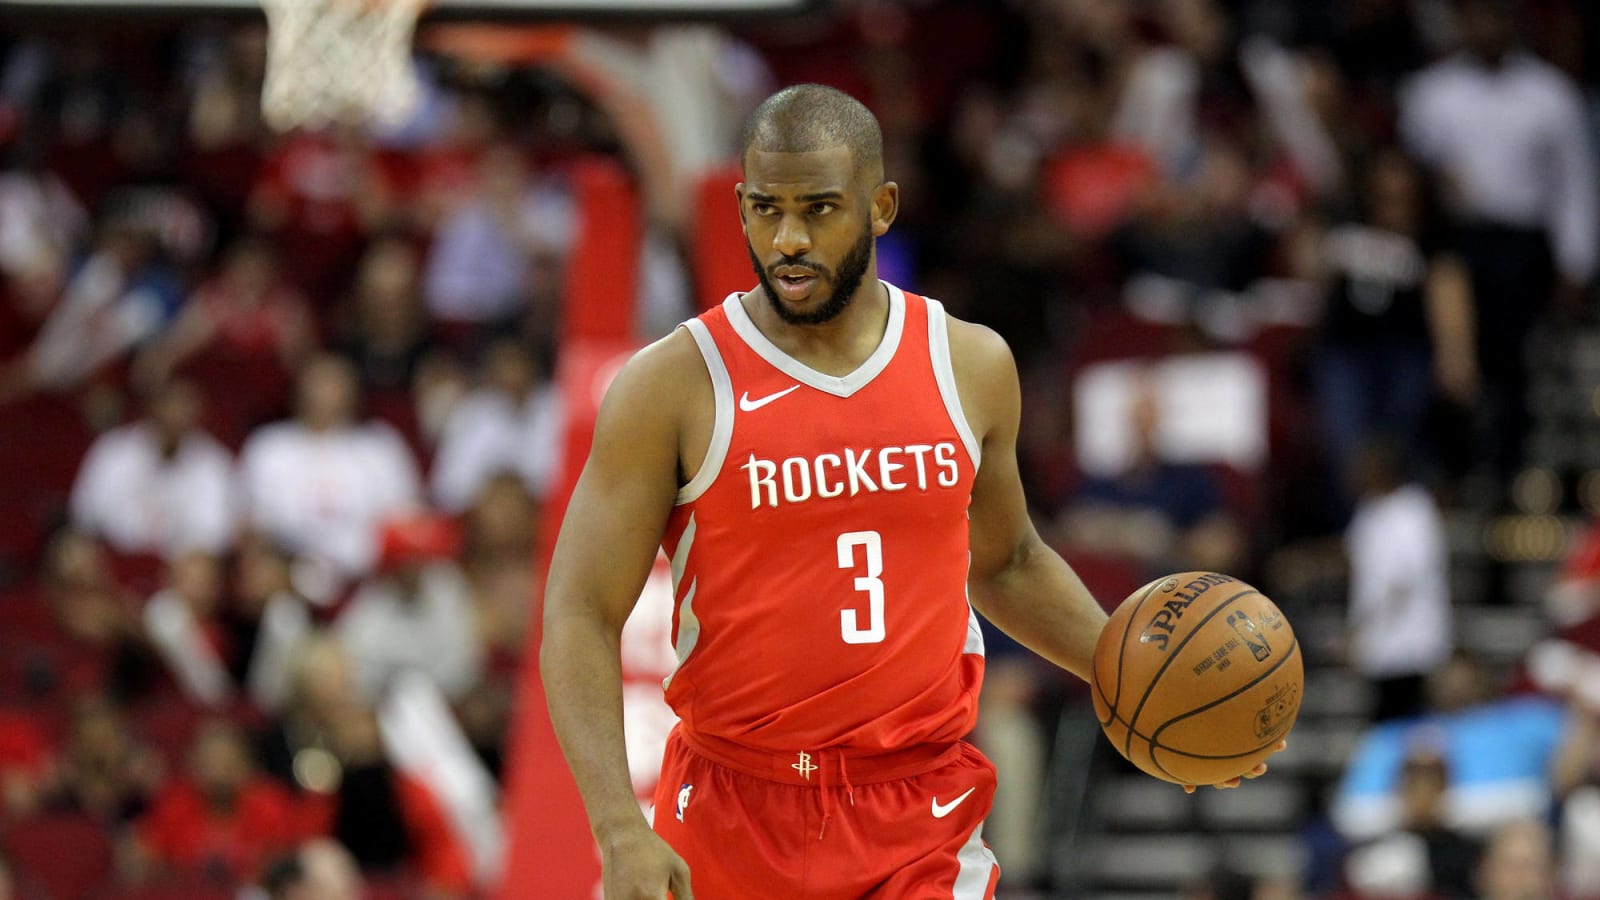 WATCH: Rockets' Chris Paul gets technical after mocking referee